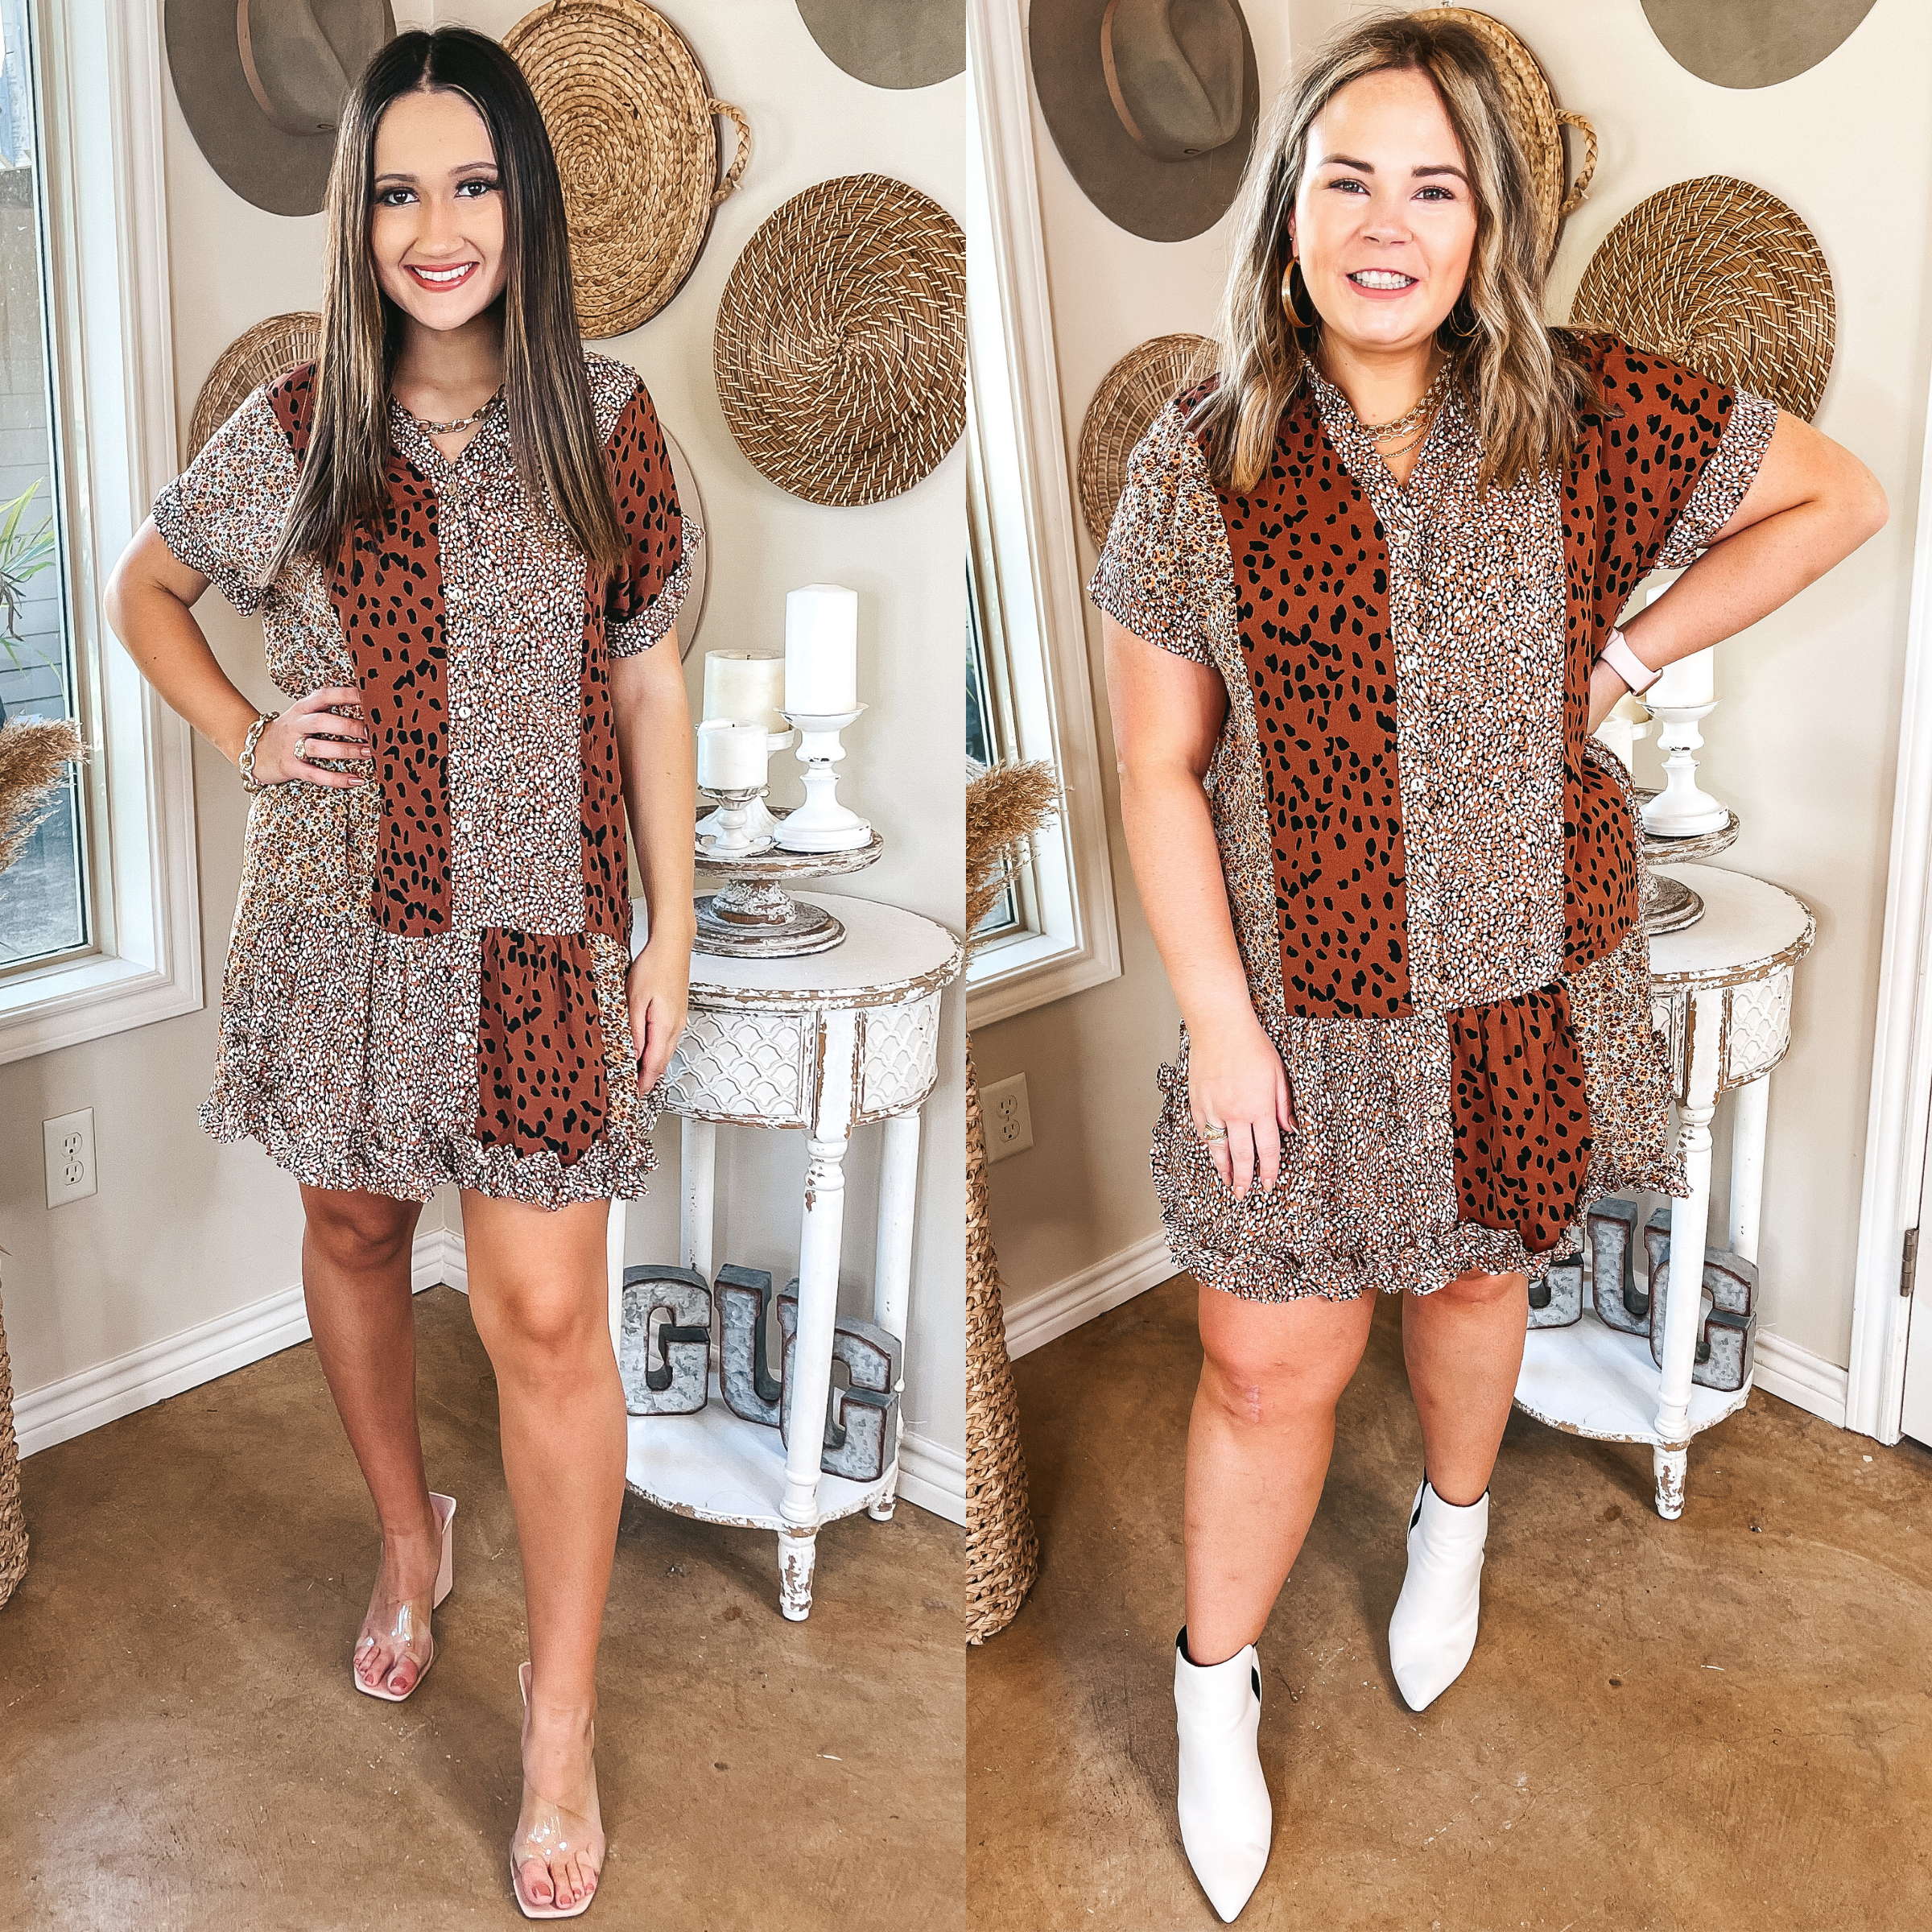 Models are wearing a button up peplum dress that hits above the knee. The dress is a mix of almond brown and black dotted print, a small floral print, and a white, black, and brown abstract print. Model on the left has it paired with clear strap heels and gold jewelry. Model on the right has it paired with white booties and gold jewelry.